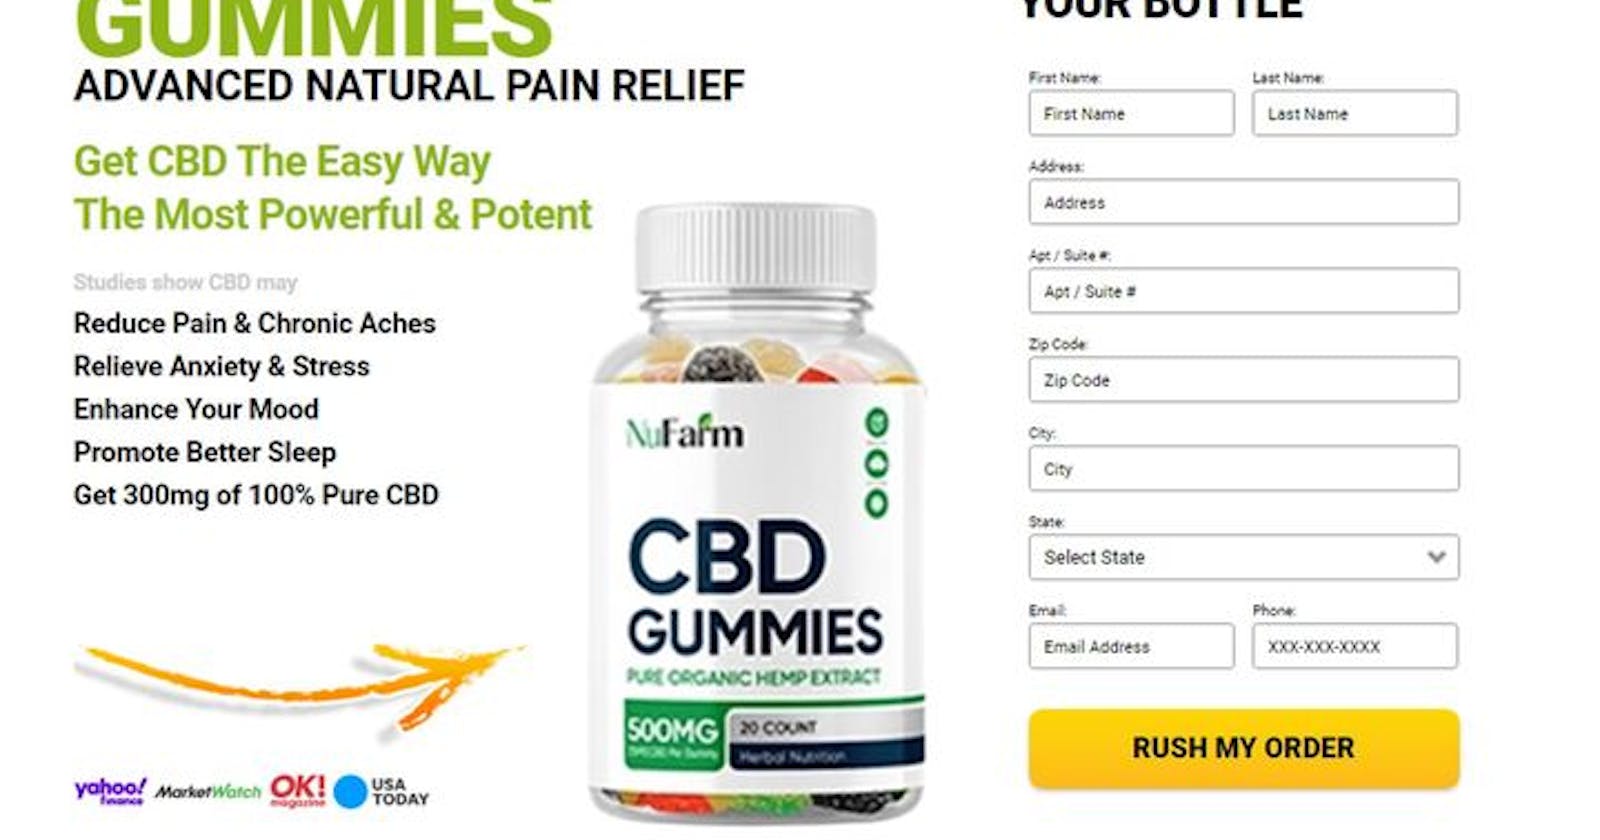 Nufarm CBD Gummies:Reviews, 100% Natural, Relief Anxiety & Stress, Joint Pain, Pure CBD, Price & Where To Buy?